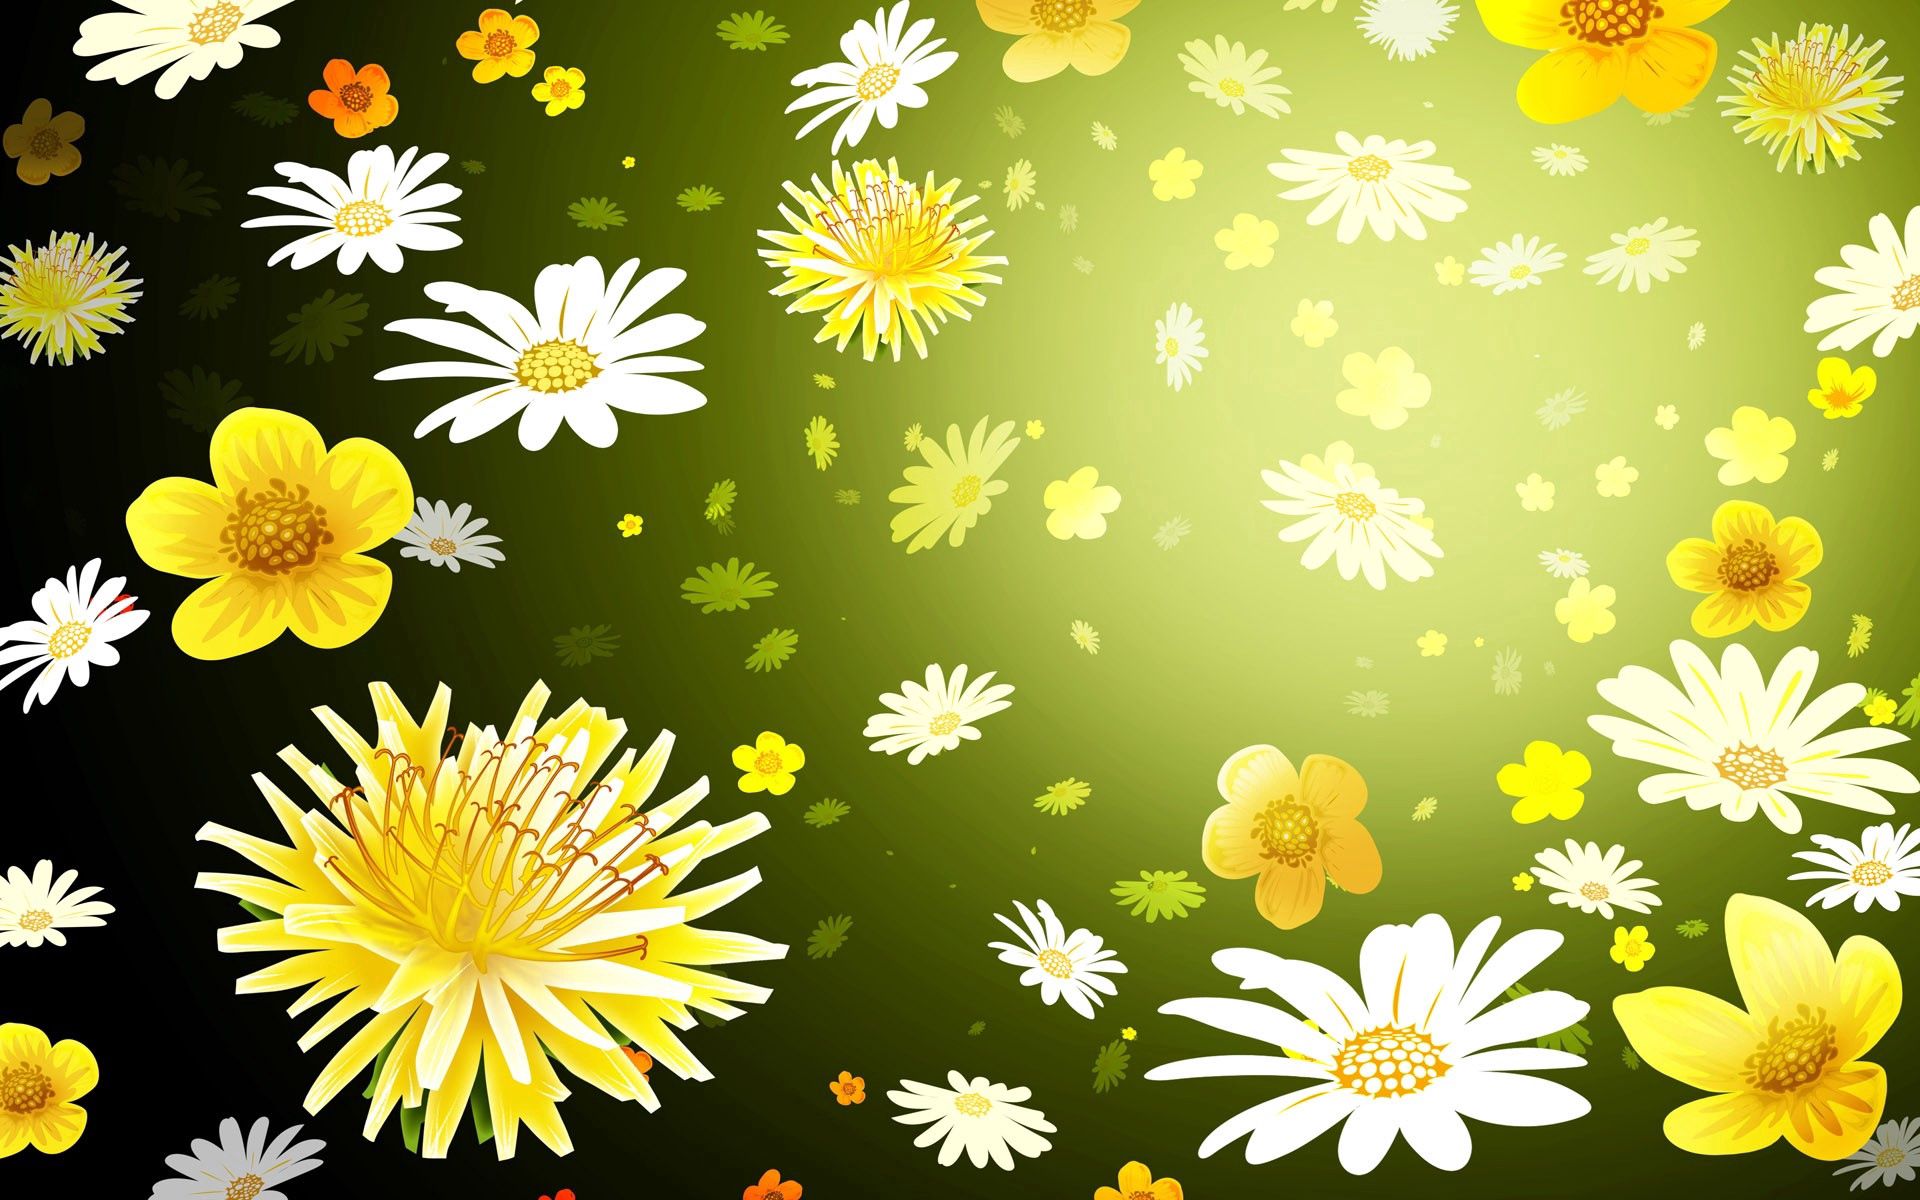 background, flowers, dandelions, camomile, texture, textures, picture, drawing Desktop home screen Wallpaper